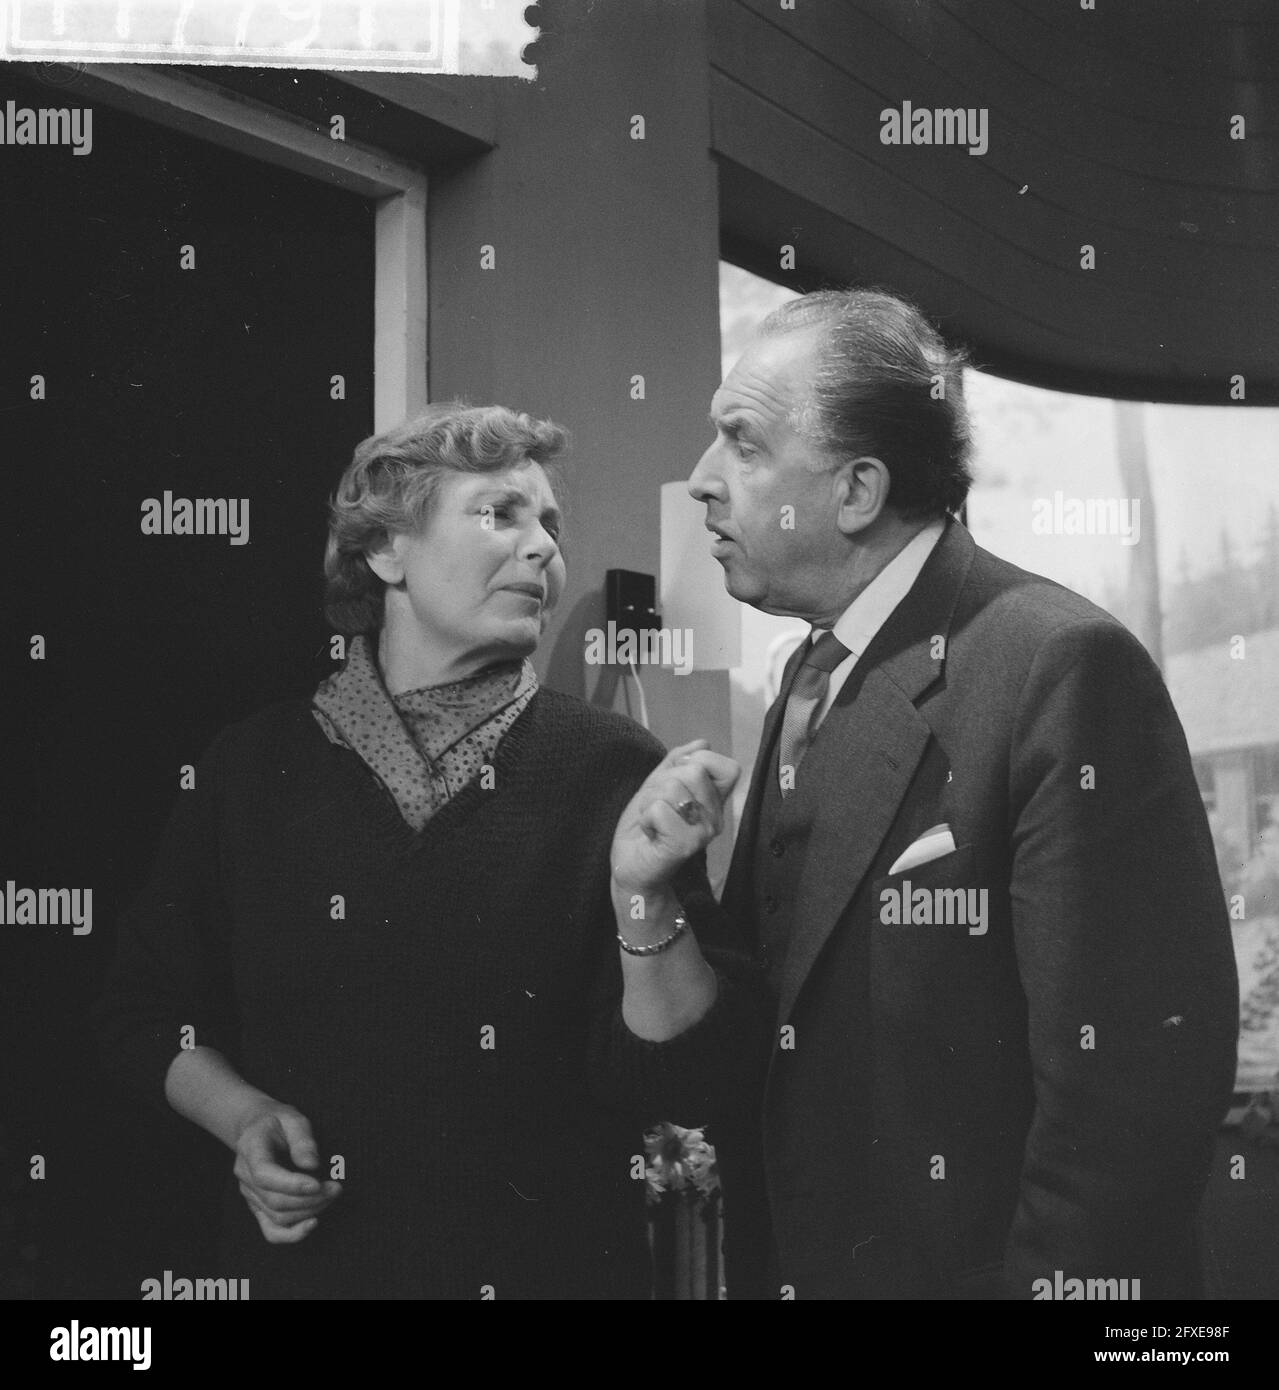 Television play Unless otherwise prescribed, Mimi Boesnach and Joris Diels, November 16, 1960, Television plays, The Netherlands, 20th century press agency photo, news to remember, documentary, historic photography 1945-1990, visual stories, human history of the Twentieth Century, capturing moments in time Stock Photo